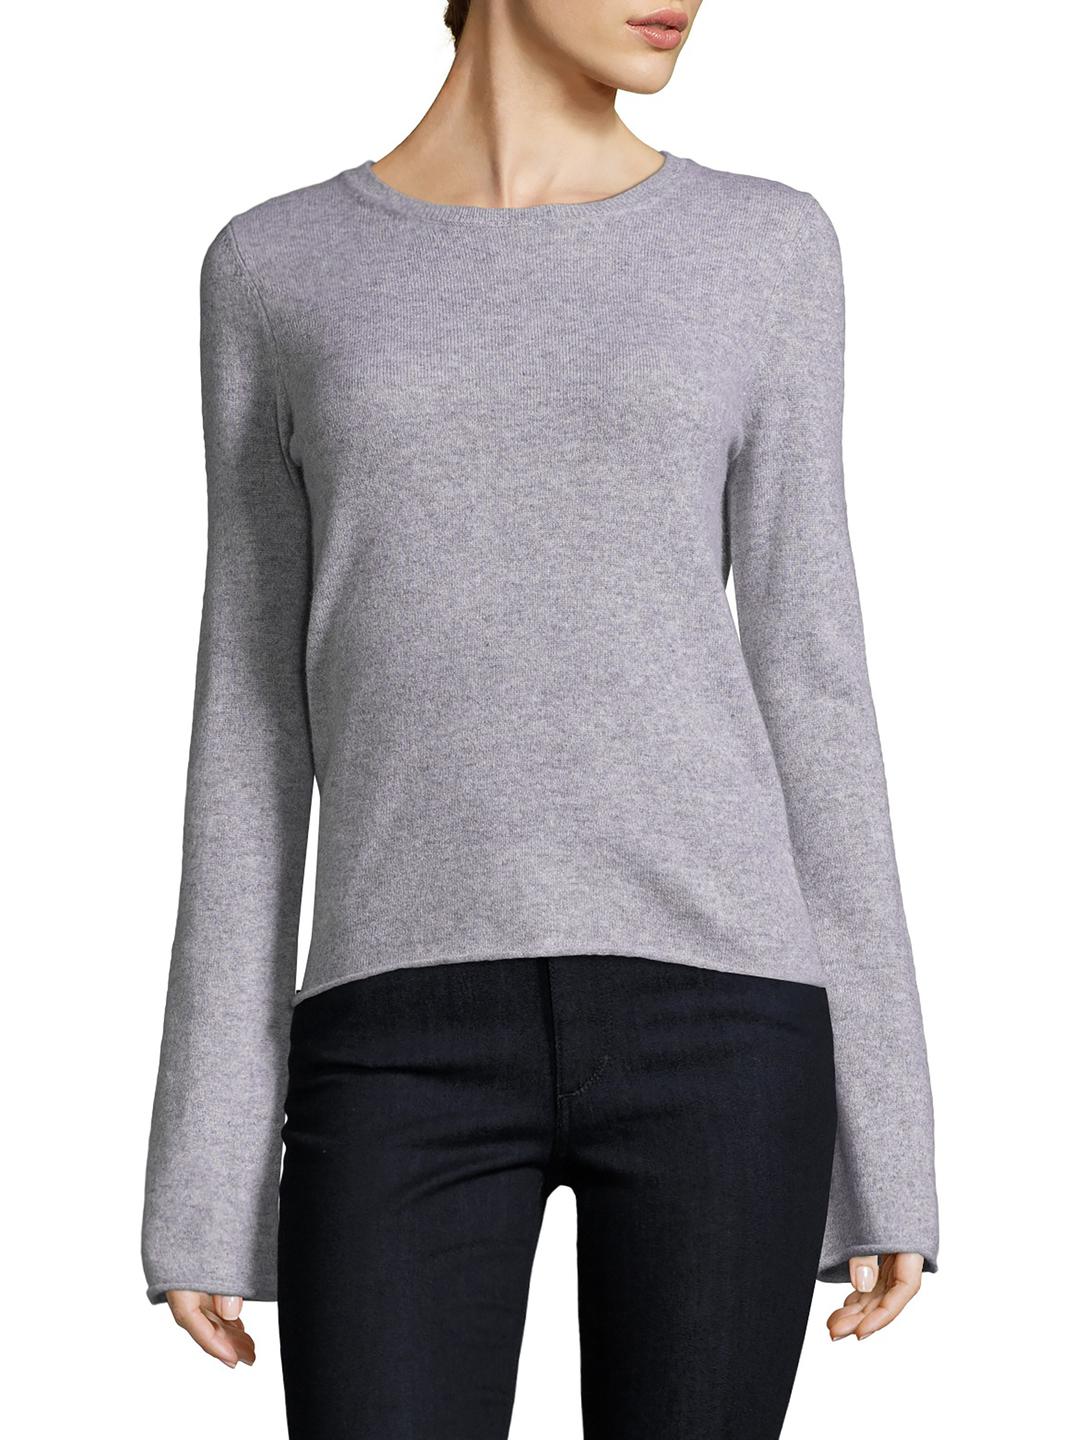 Lyst - Naked Cashmere Gio Cashmere Sweater in Gray